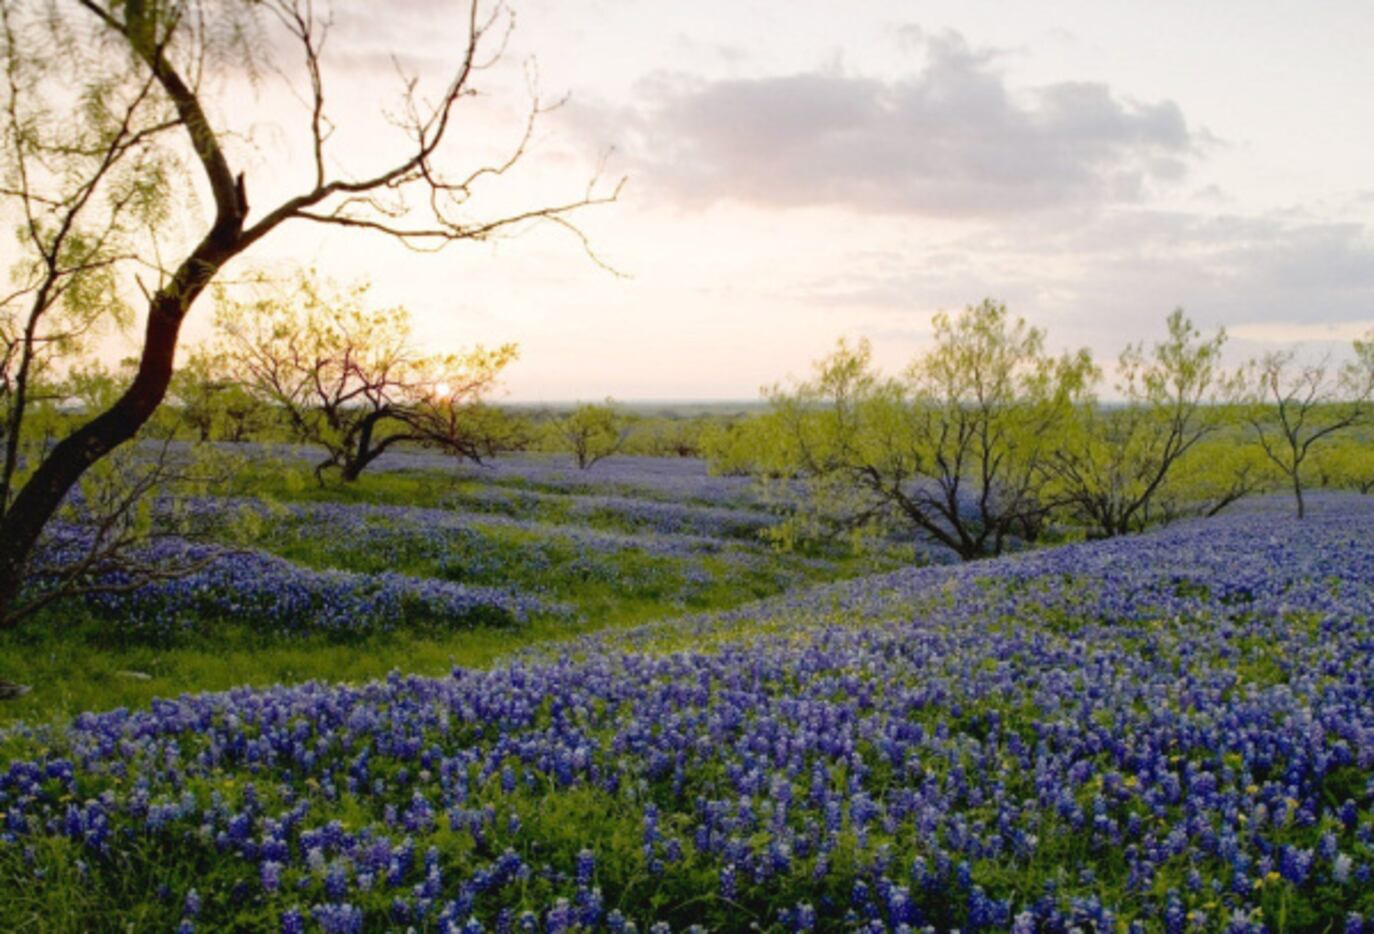 Unusually warm weather has caused wildflowers to bloom early across the state, according to...